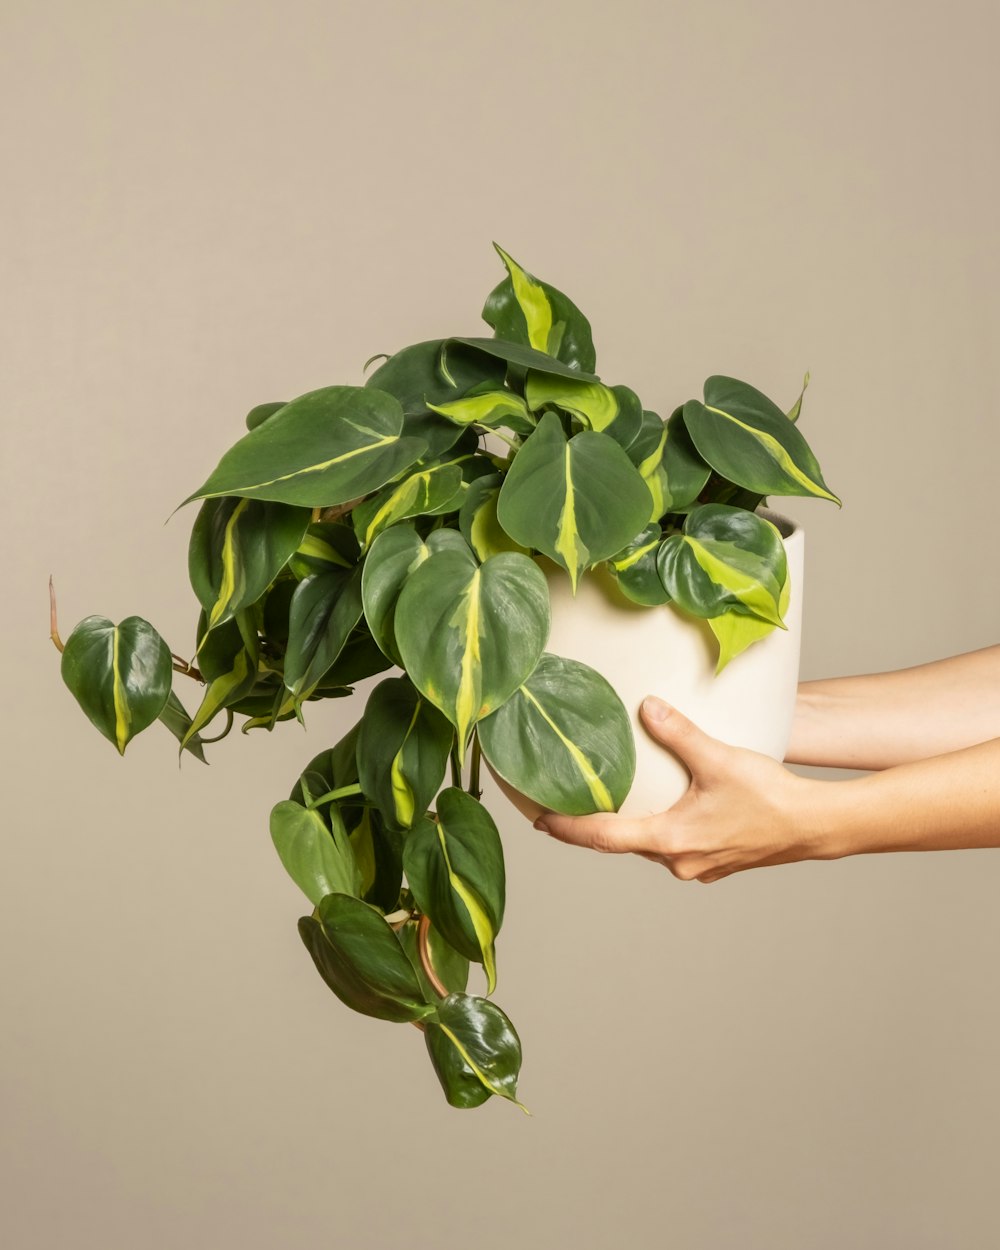 a person holding a potted plant with green leaves